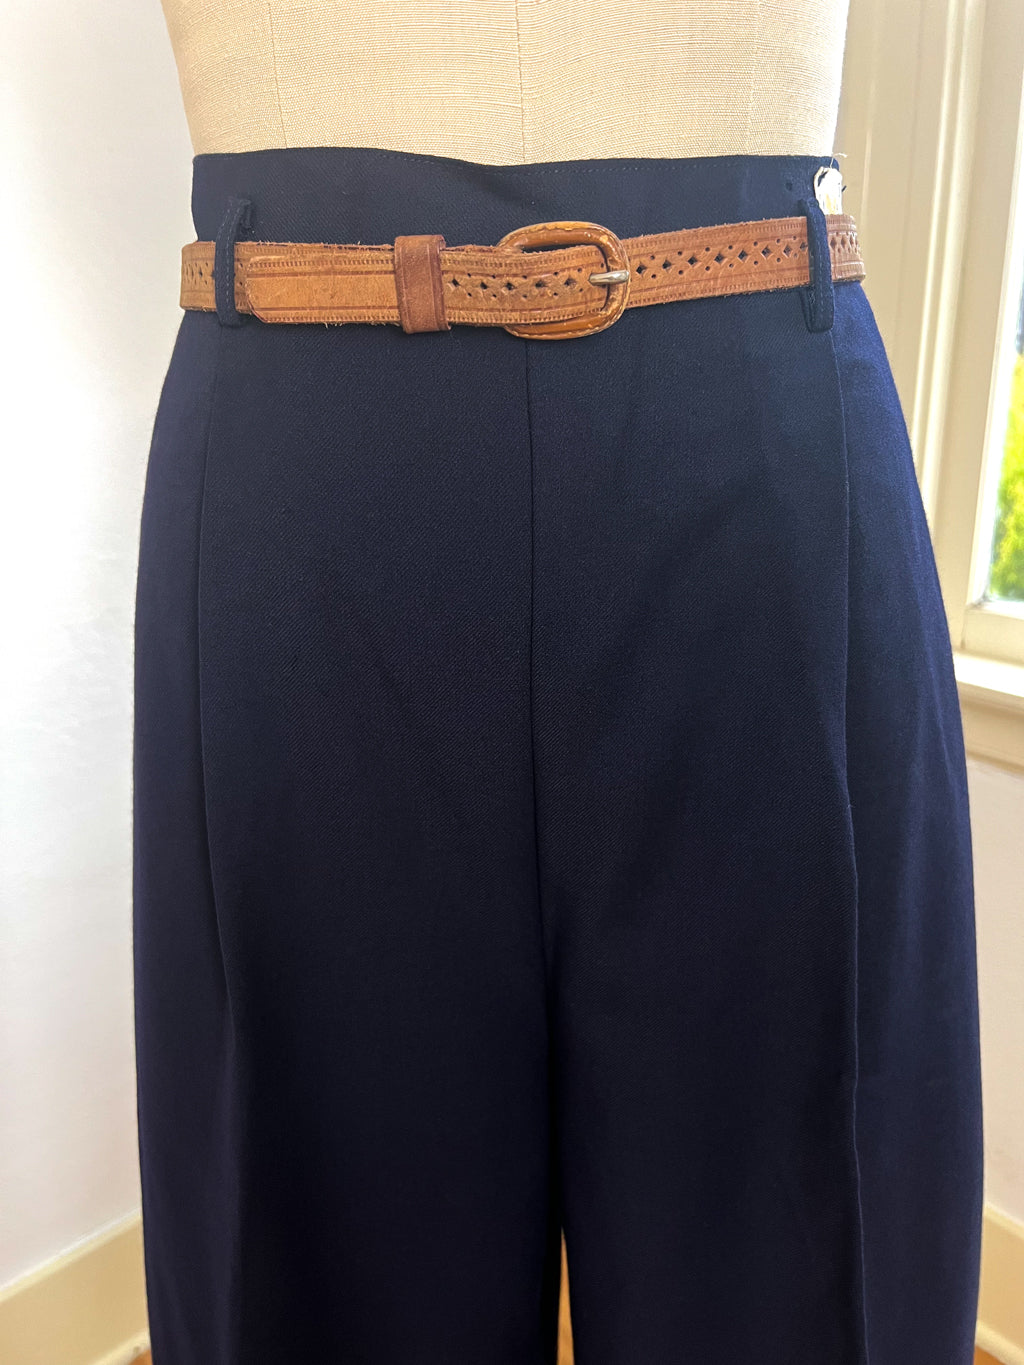 28 Inch Waist Unused French Vintage Wide Leg Pants Navy Blue Cotton Twill  Pants Button Fly 28 Inch Inseam Deadstock Trousers Textile Trunk 